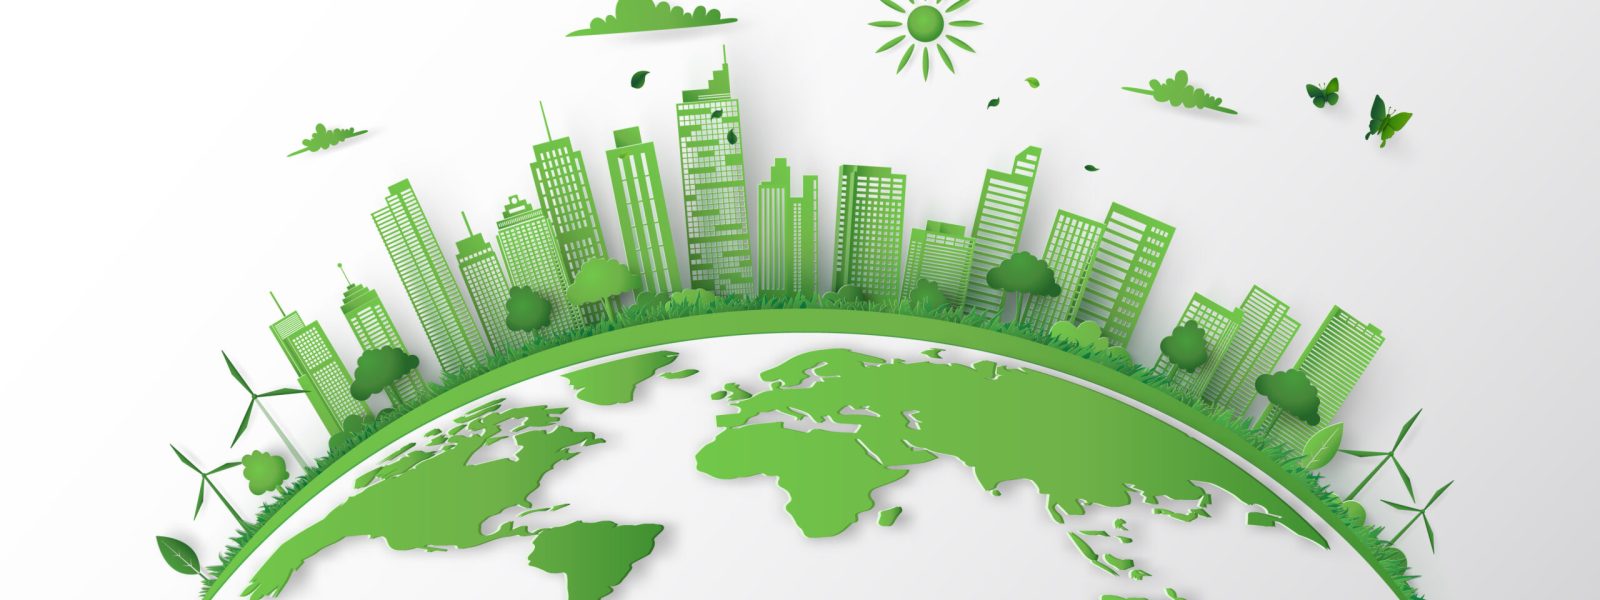 Concept of Sustainable Developments